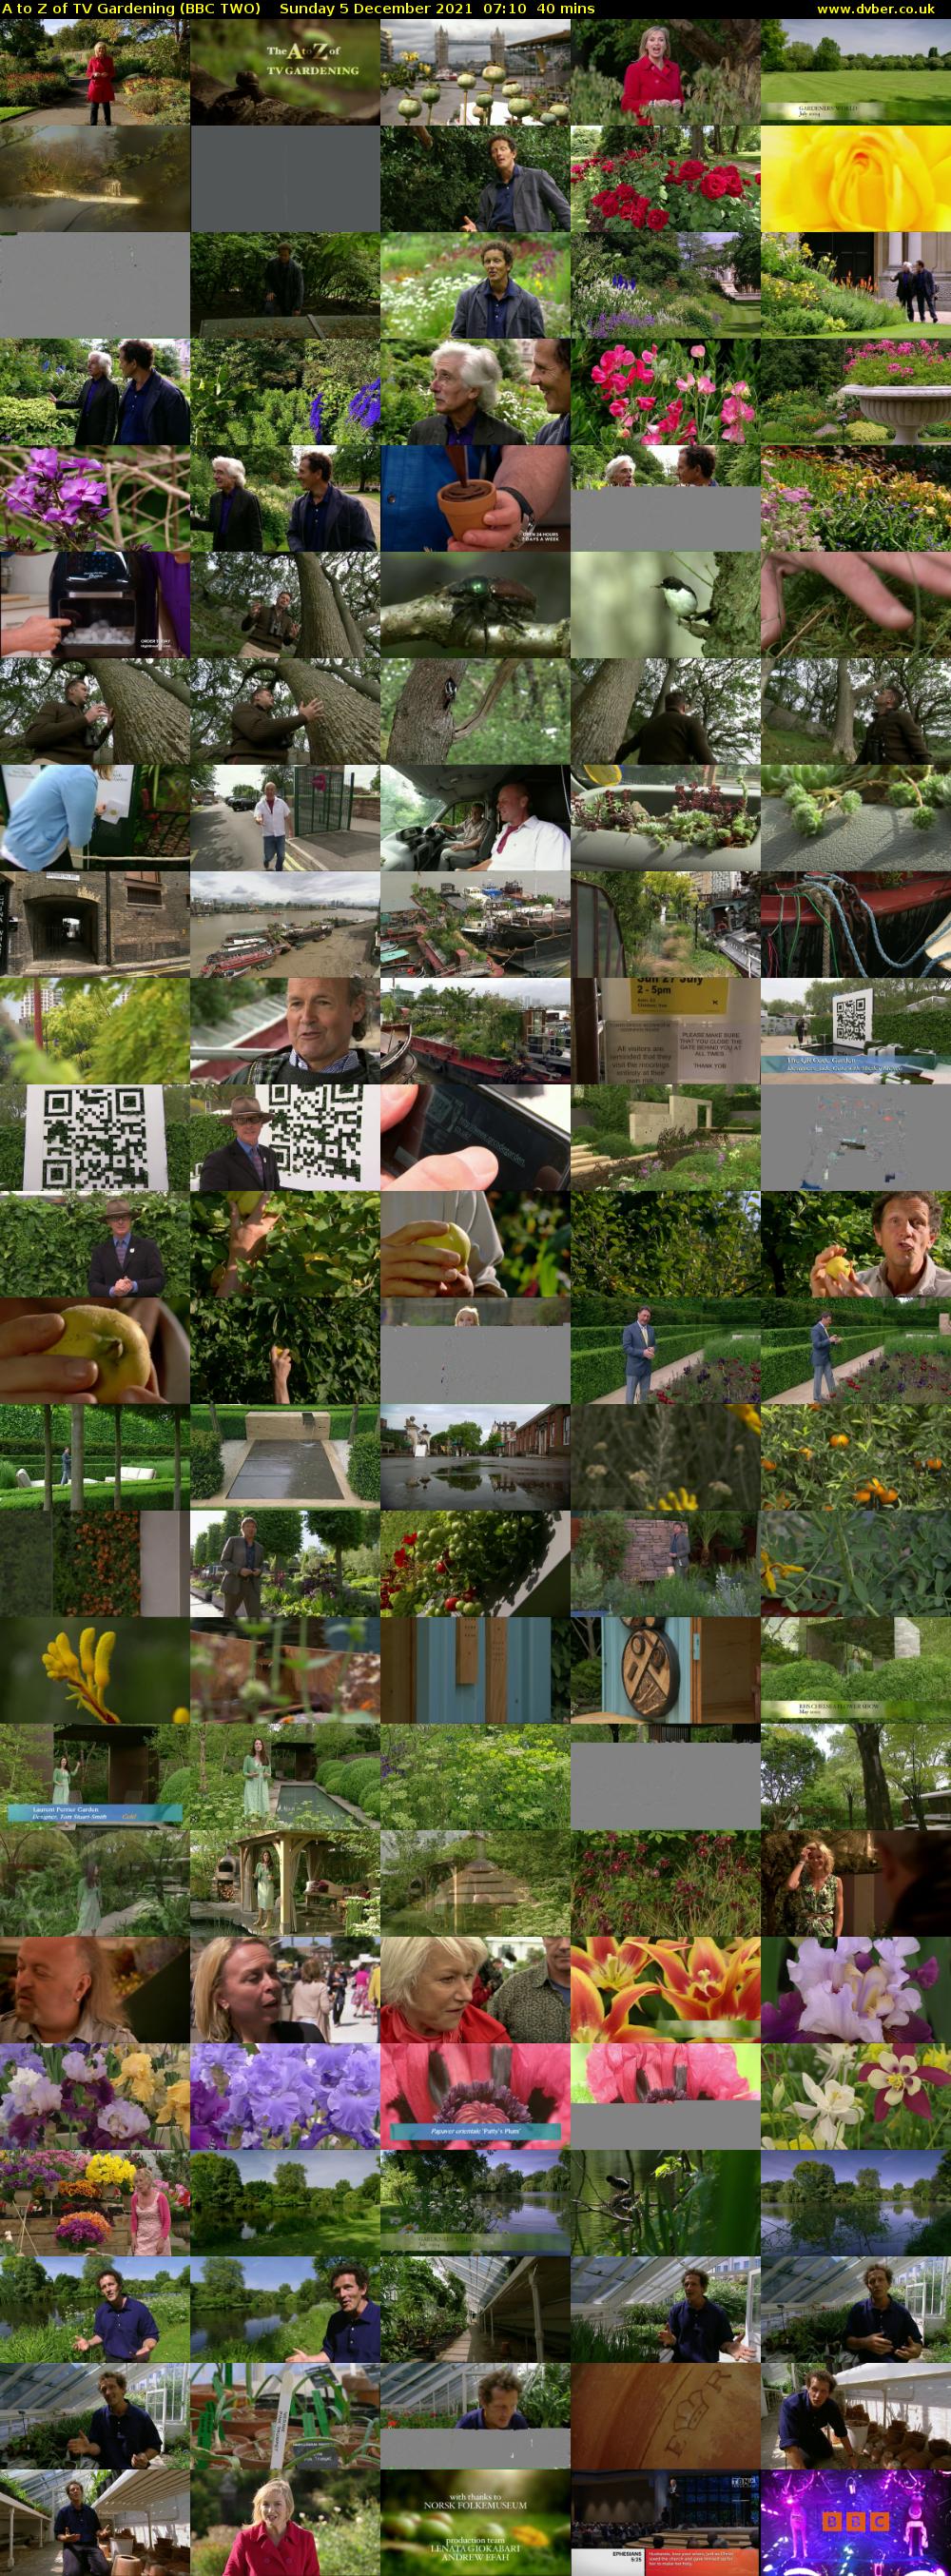 A to Z of TV Gardening (BBC TWO) Sunday 5 December 2021 07:10 - 07:50